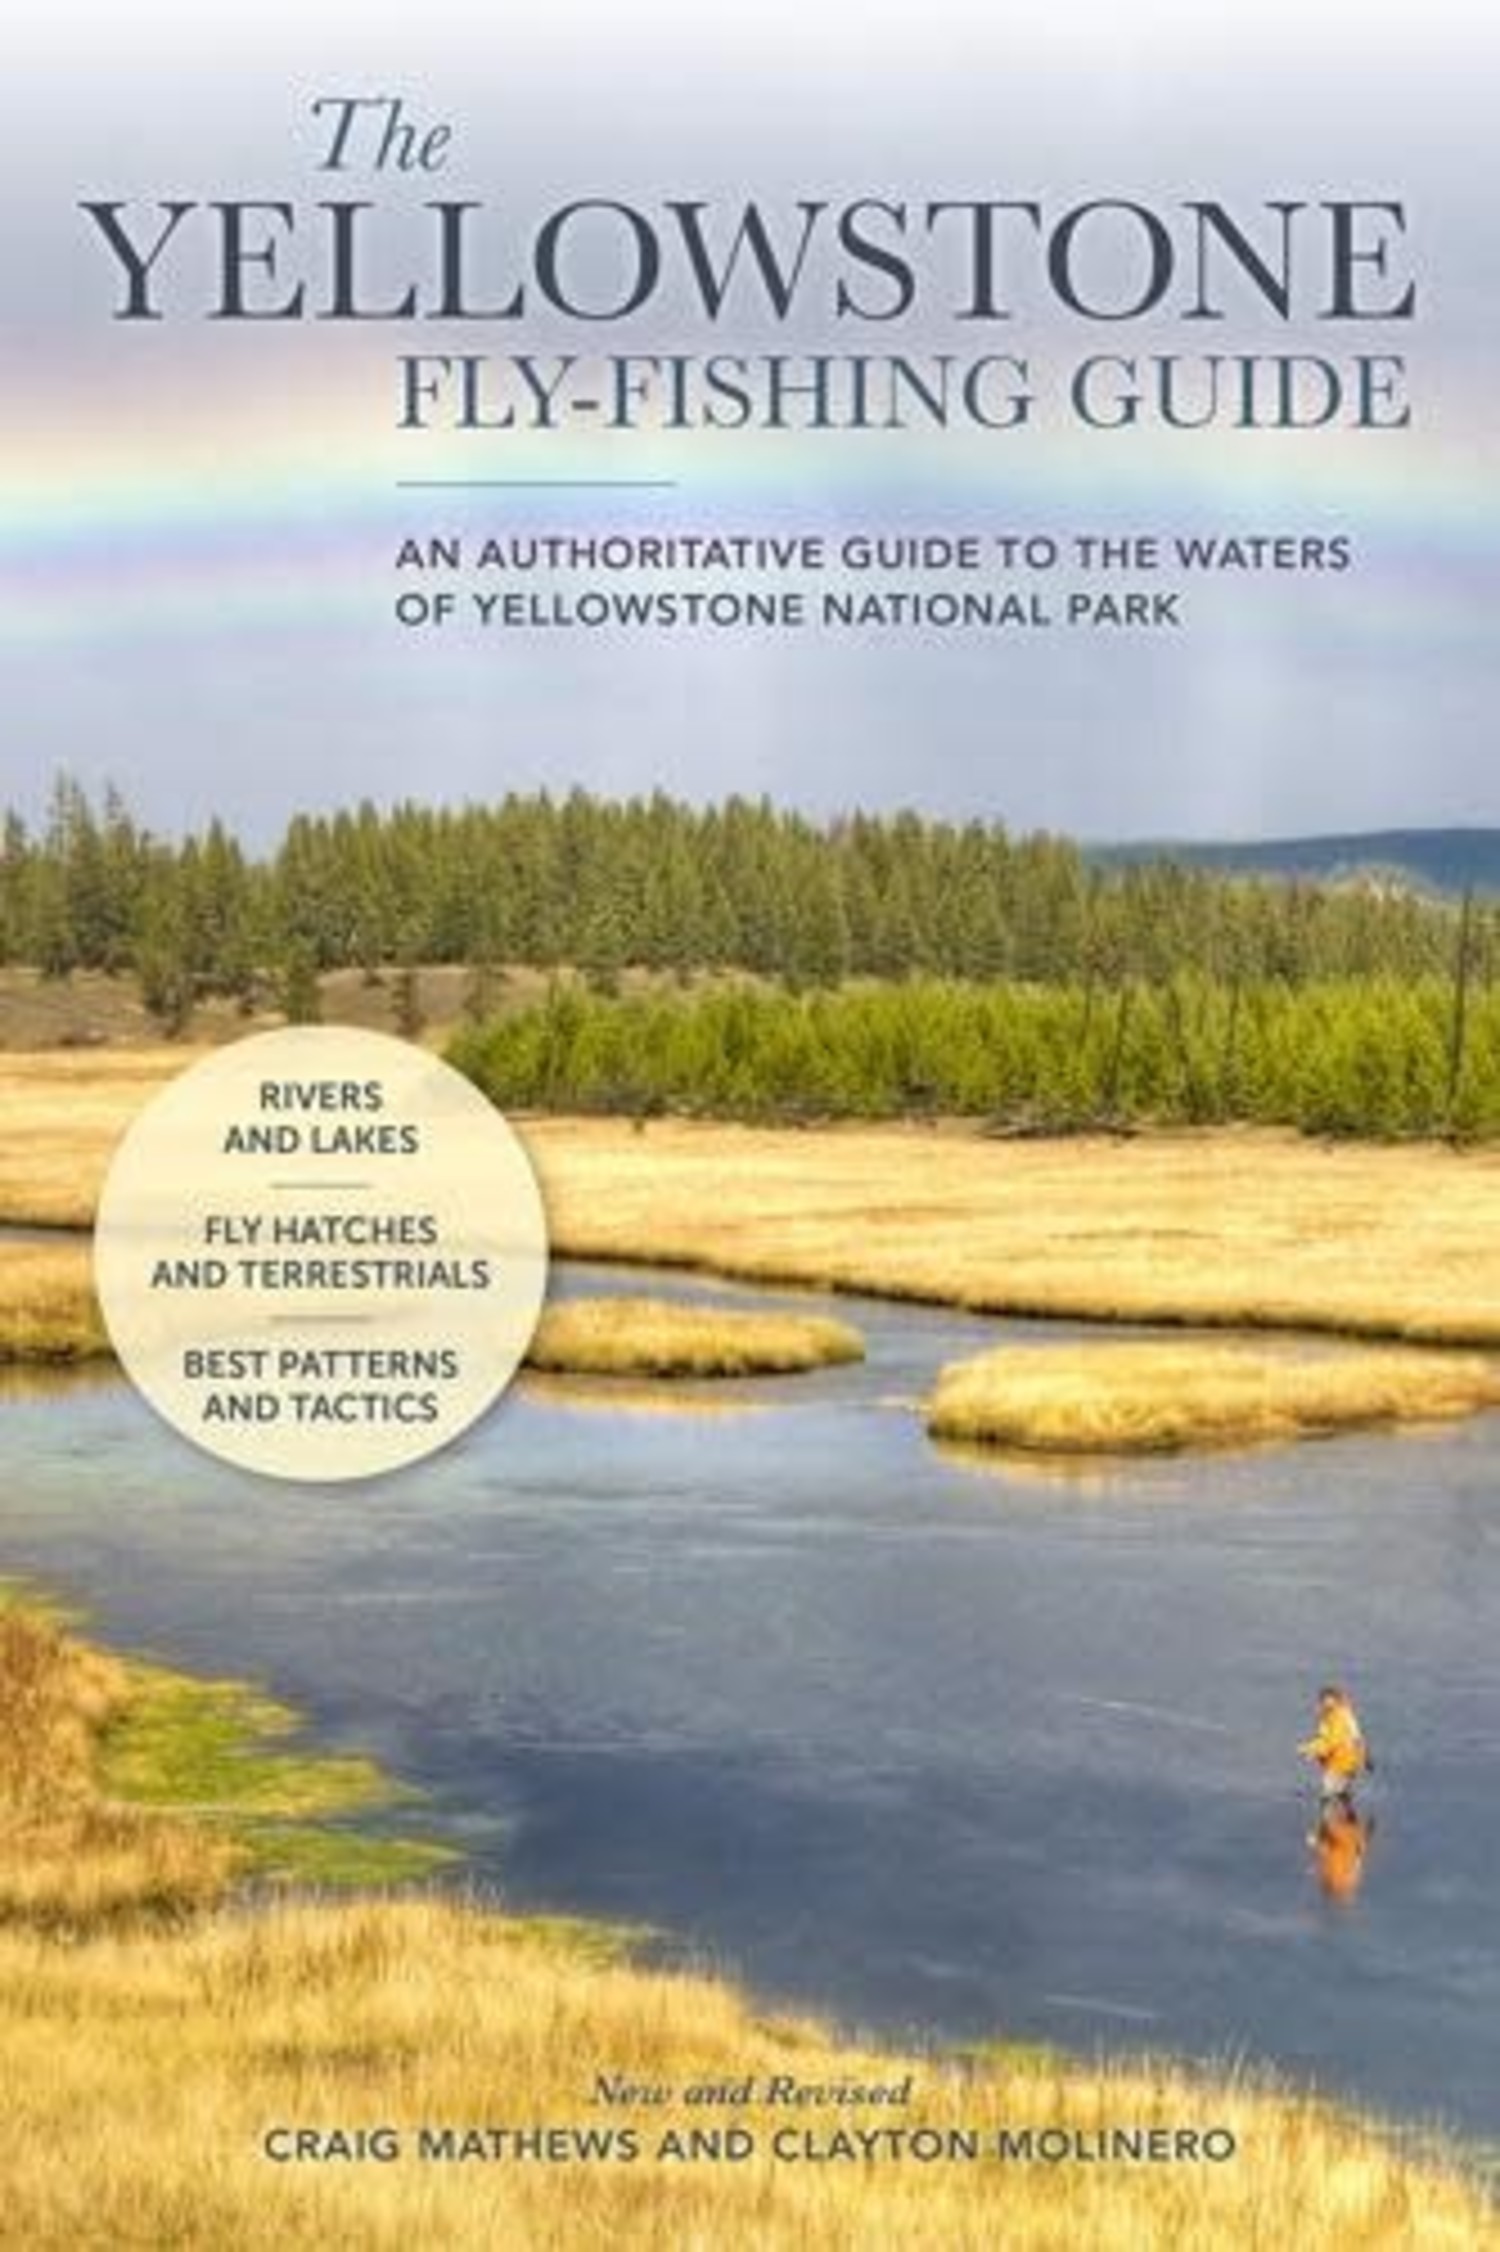 THE YELLOWSTONE FLY-FISHING GUIDE NEW AND REVISED - Royal